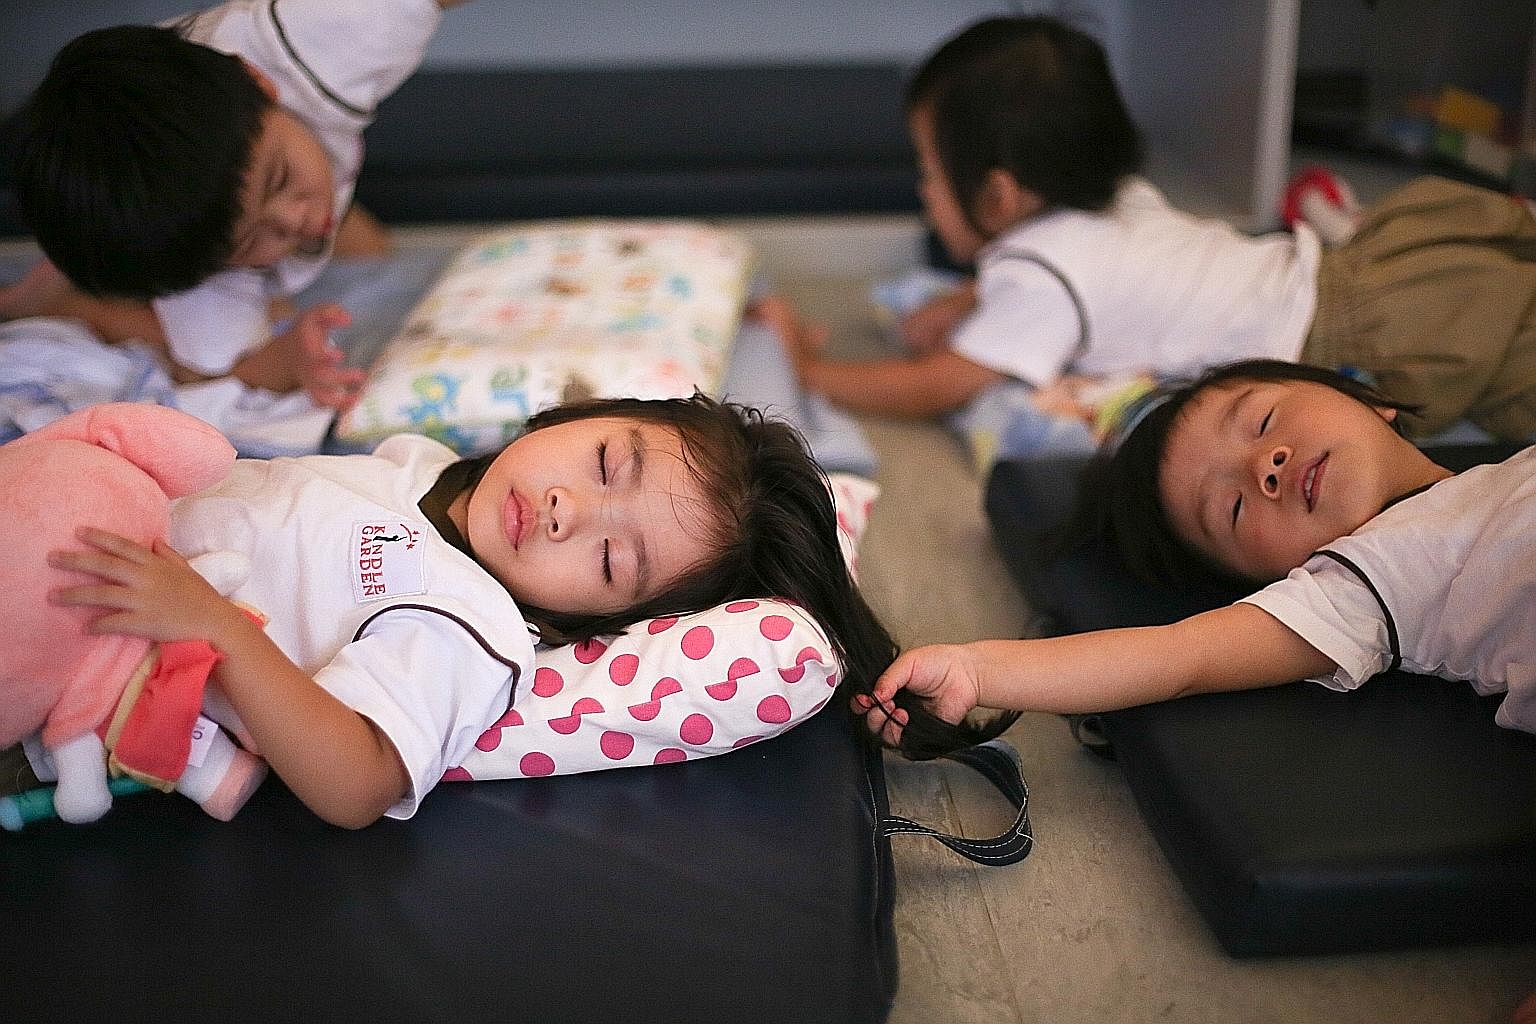 Nursery 1 classmates Oriana Yip (left) and Rhea Lim, both three, take a well-deserved nap after a day of activities and running around. To encourage independence, all the children lay out and put away their beds and sheets themselves. Those who strug